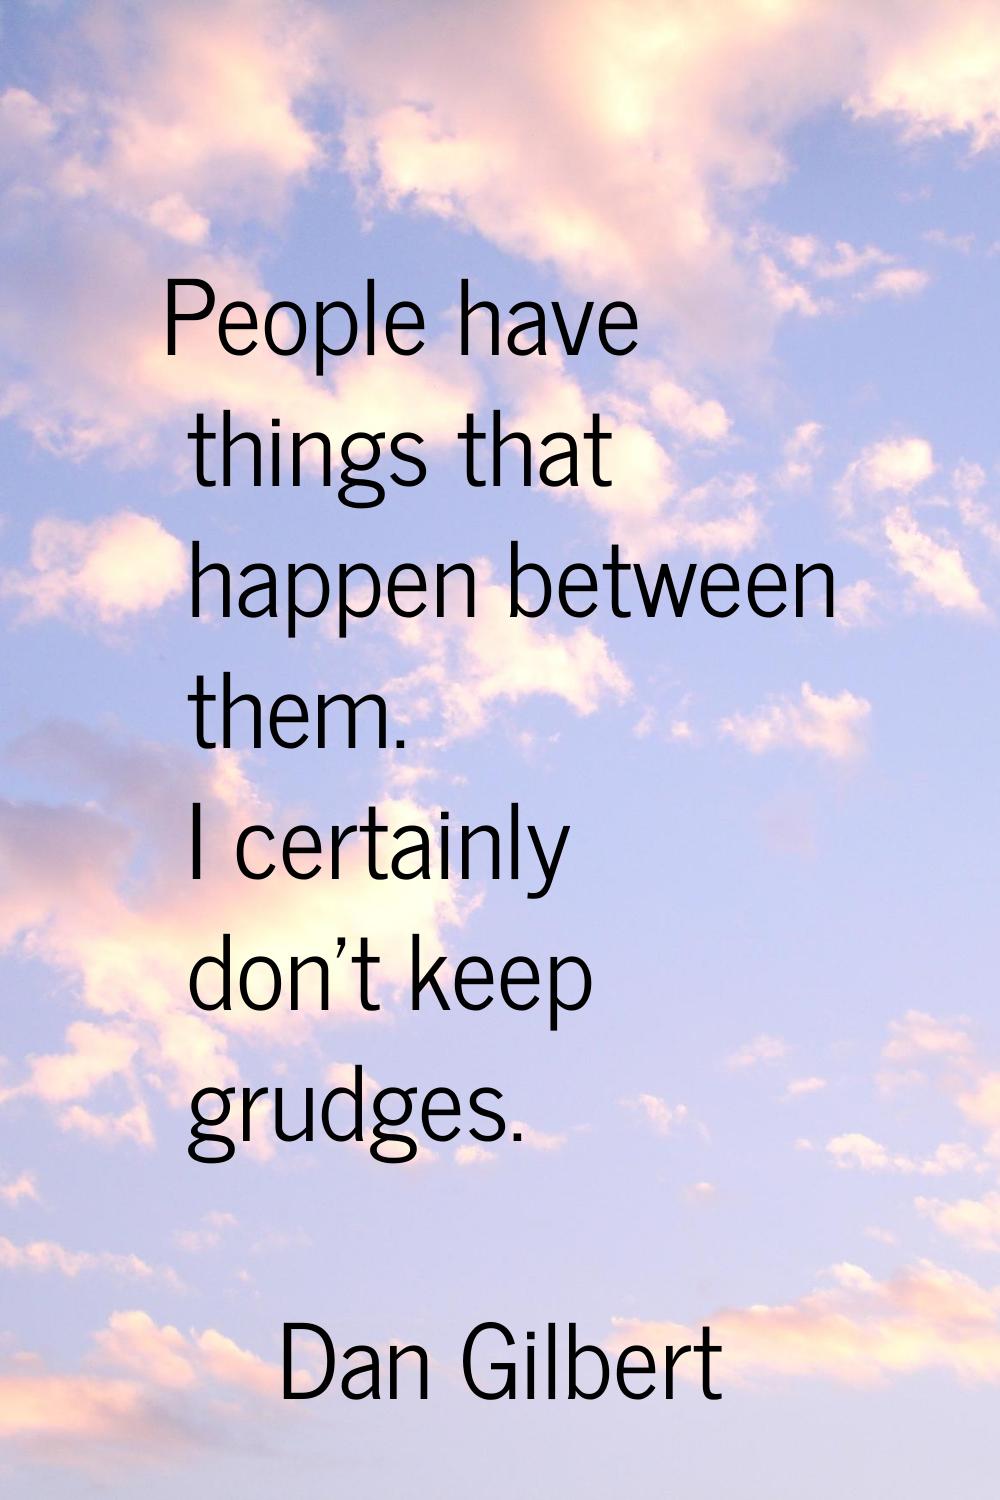 People have things that happen between them. I certainly don't keep grudges.